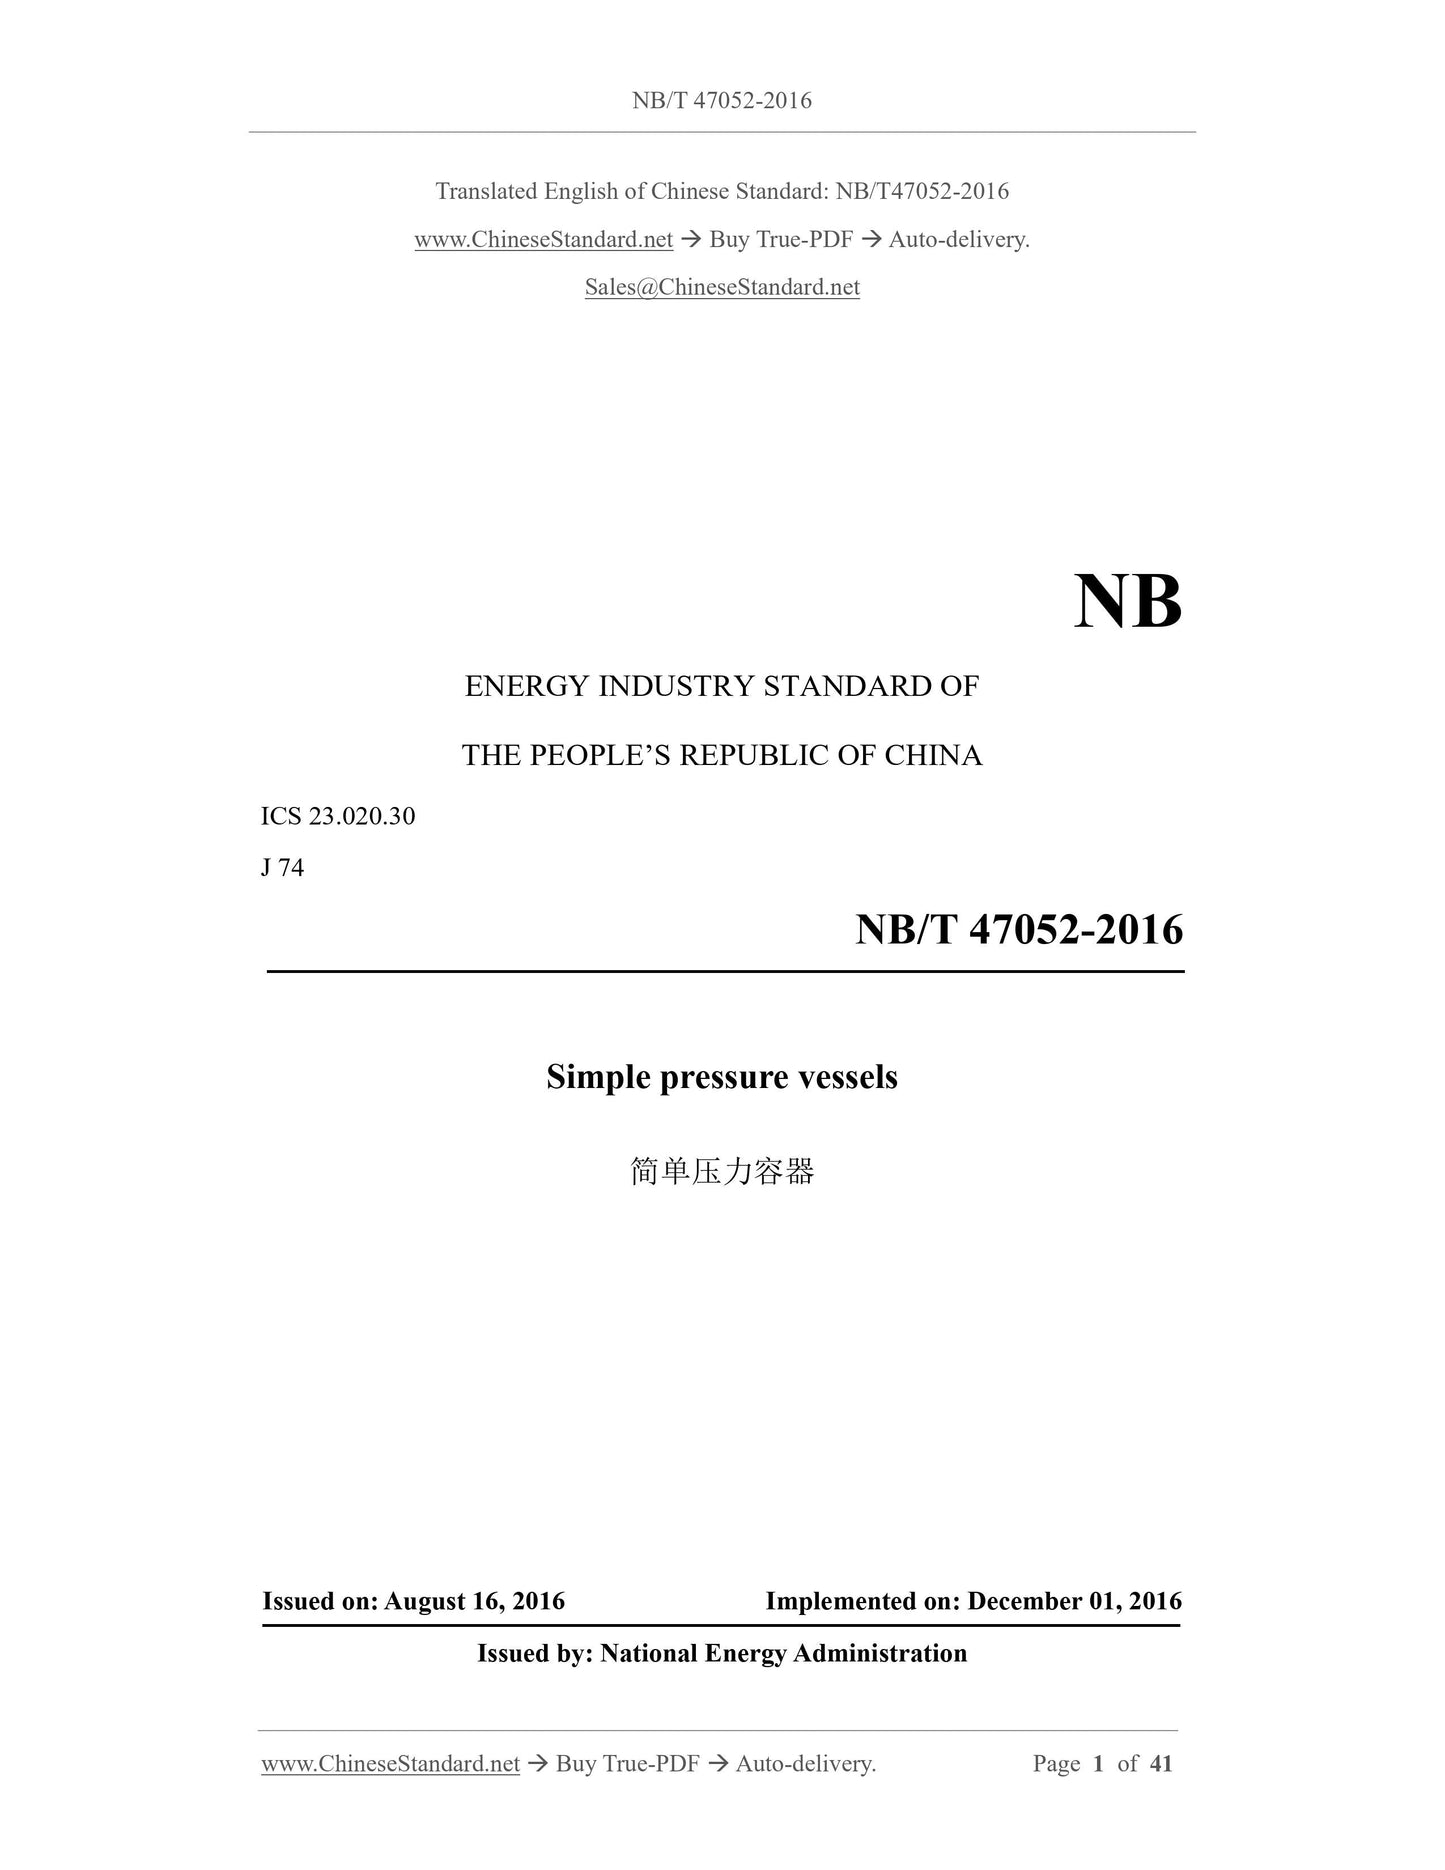 NB/T 47052-2016 Page 1